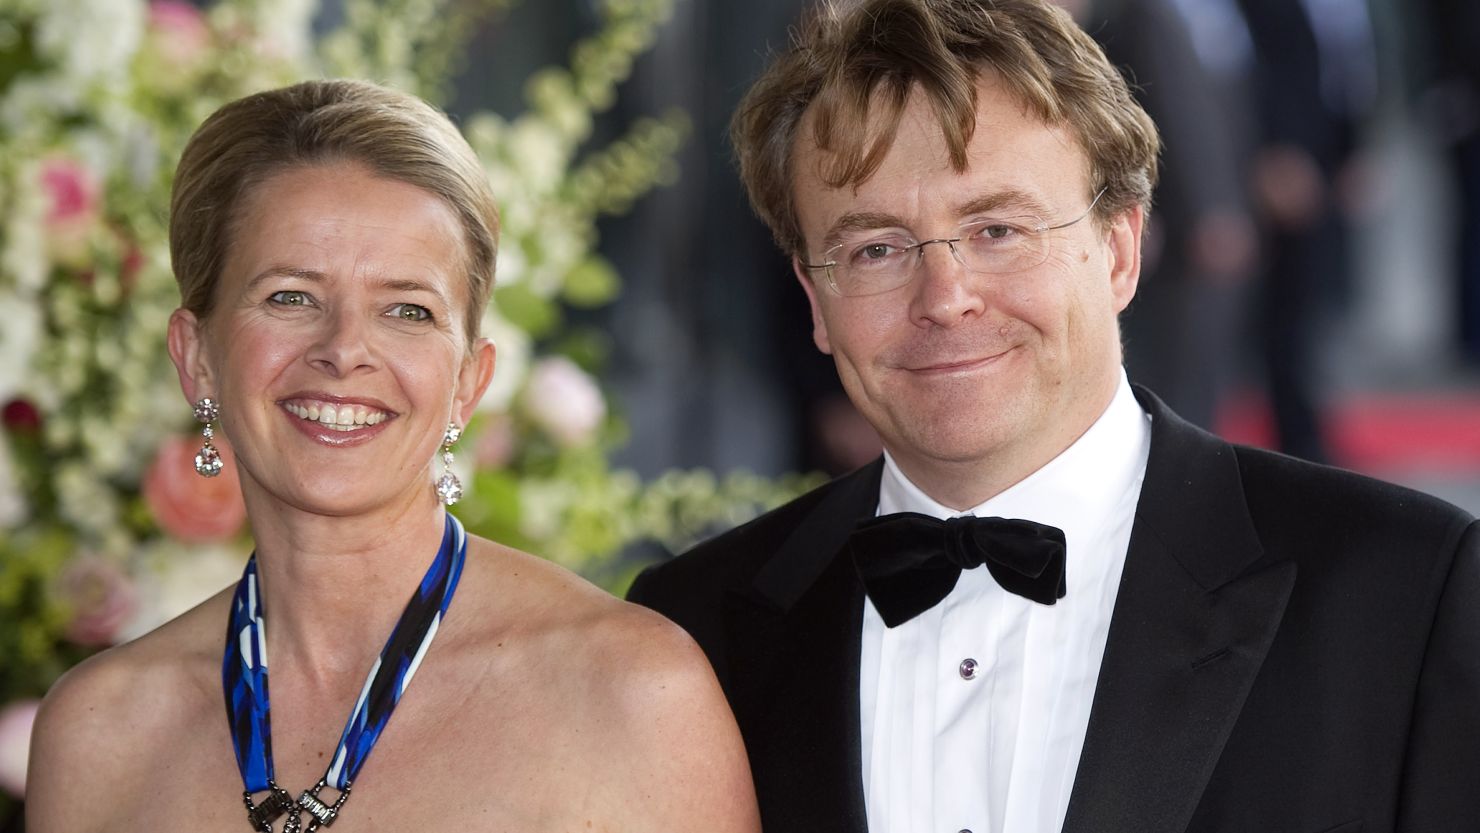 Dutch Princess Mabel and Prince Johan Friso arrive at a concert building in Amsterdam on May 27, 2011.